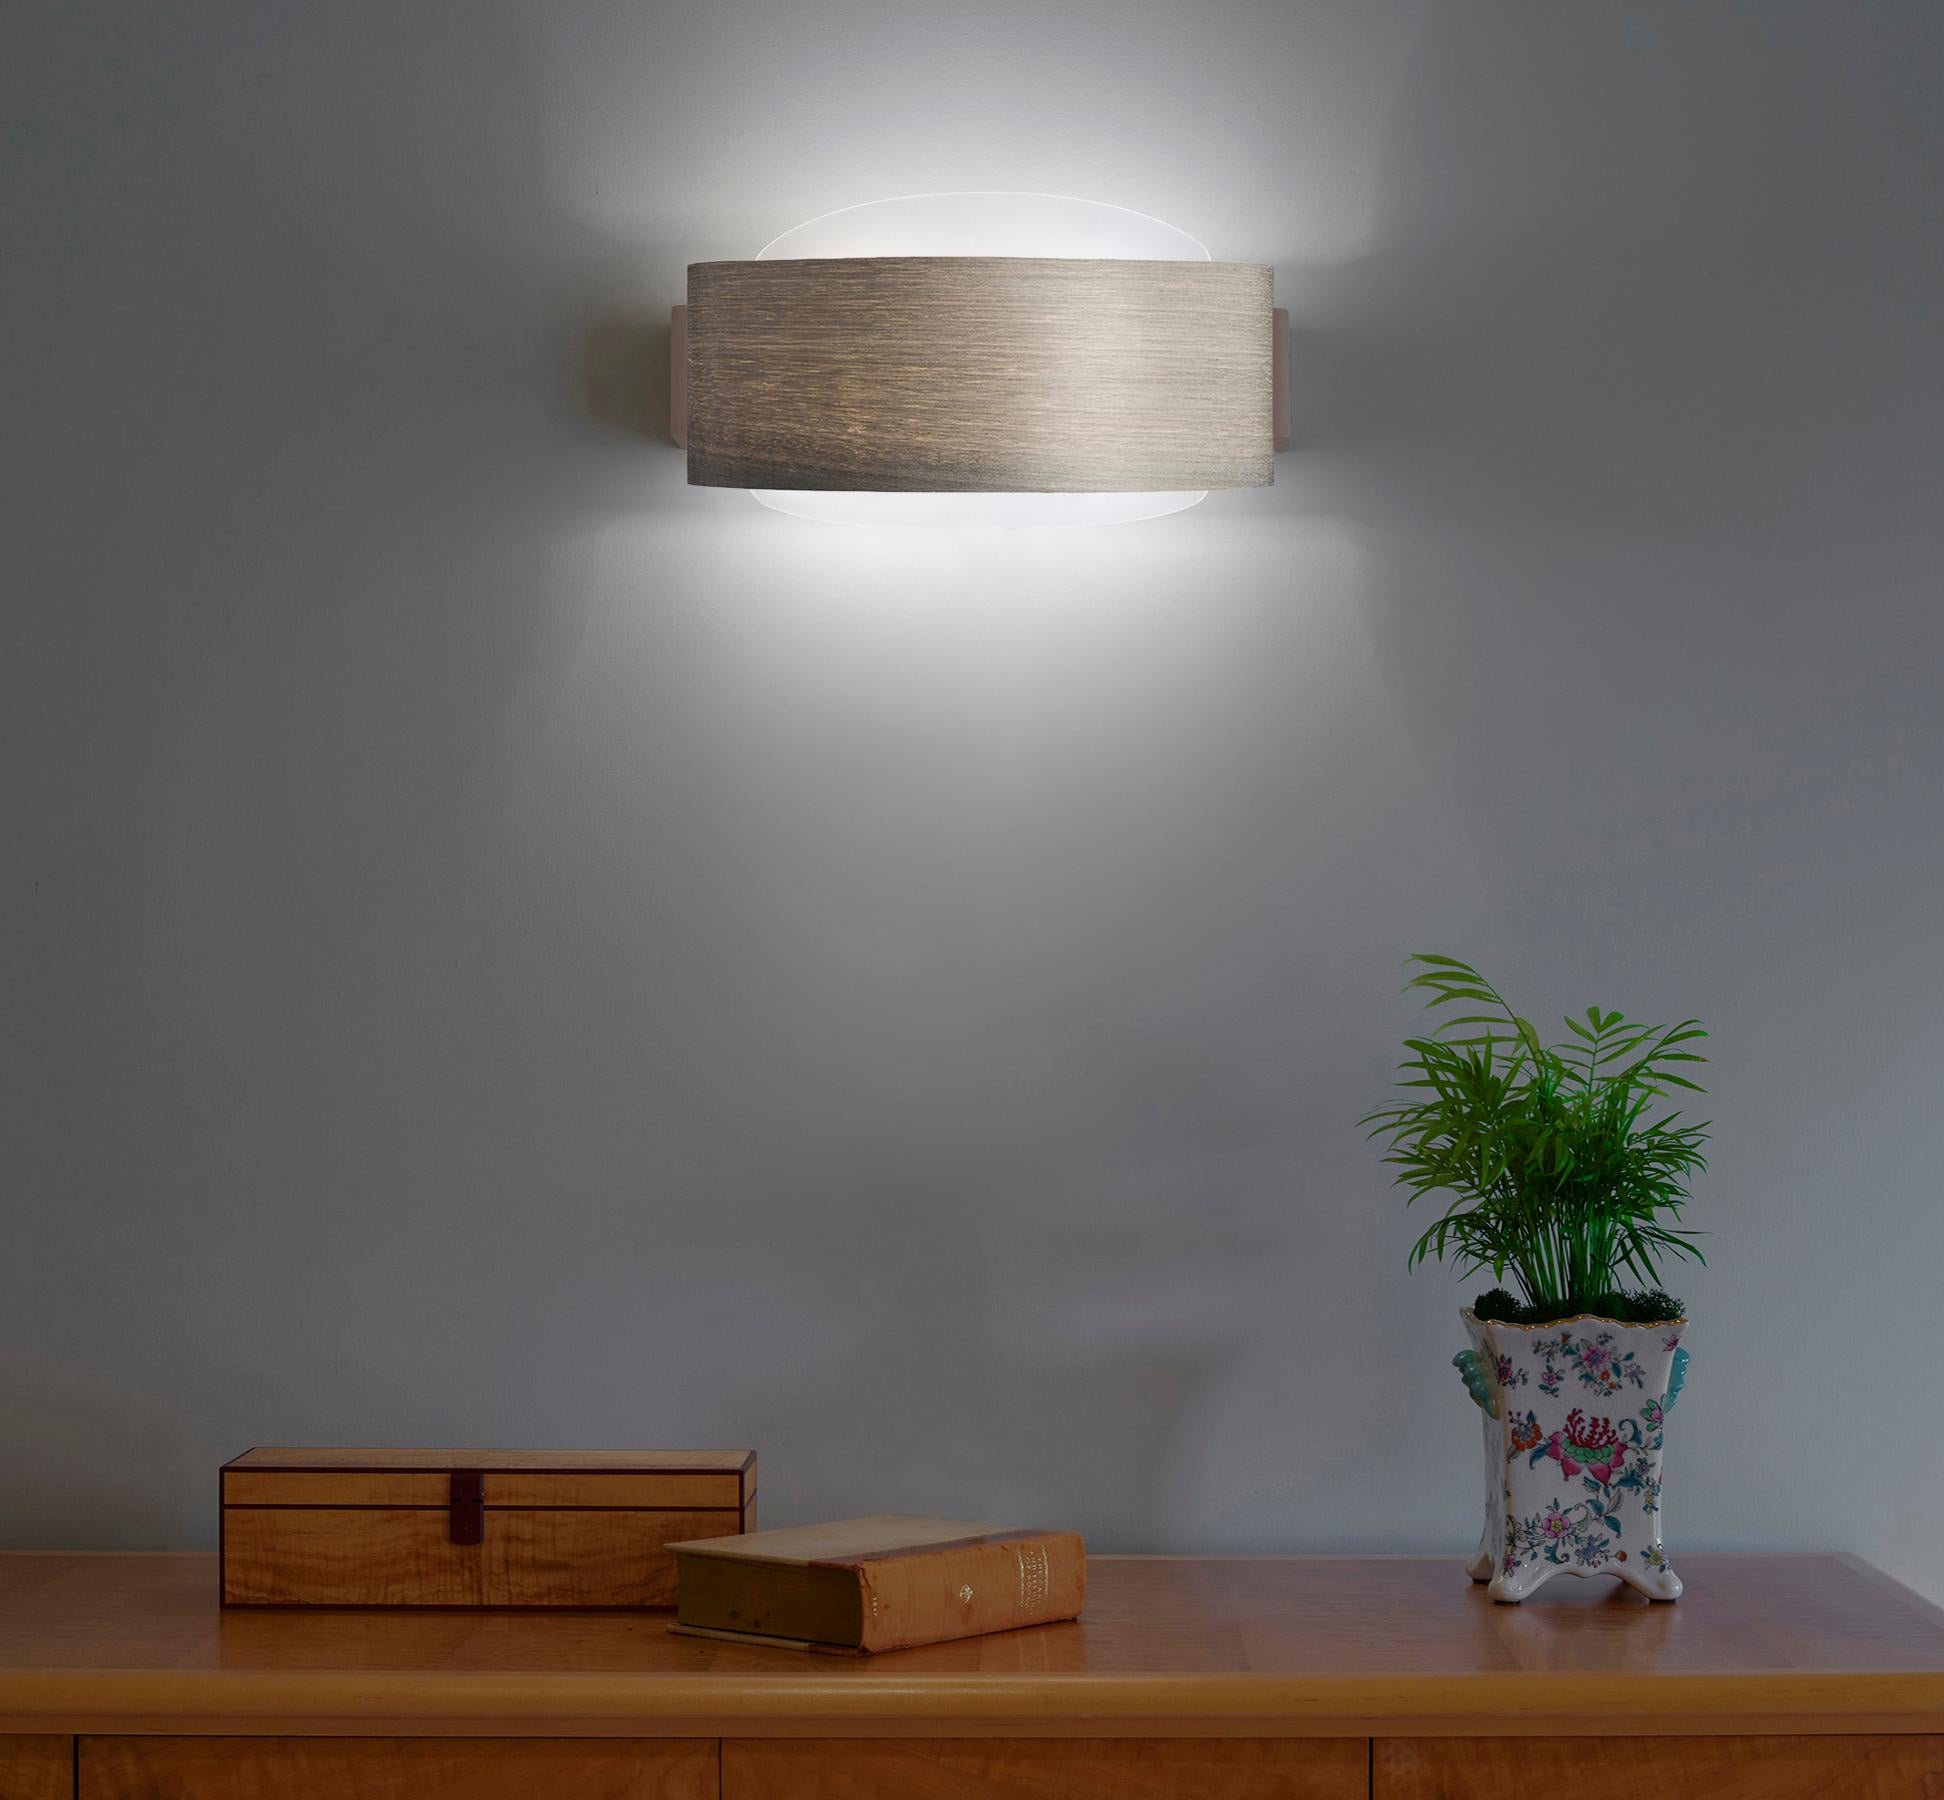 HALO is a Modern sconce that casts perfect, symmetrical light, imbuing a sense of calm and serenity. It can be used as accent lighting, in entryways, hallways, and looks wonderful in sets of two. Gray Tay is harvested from the African Koto tree. The